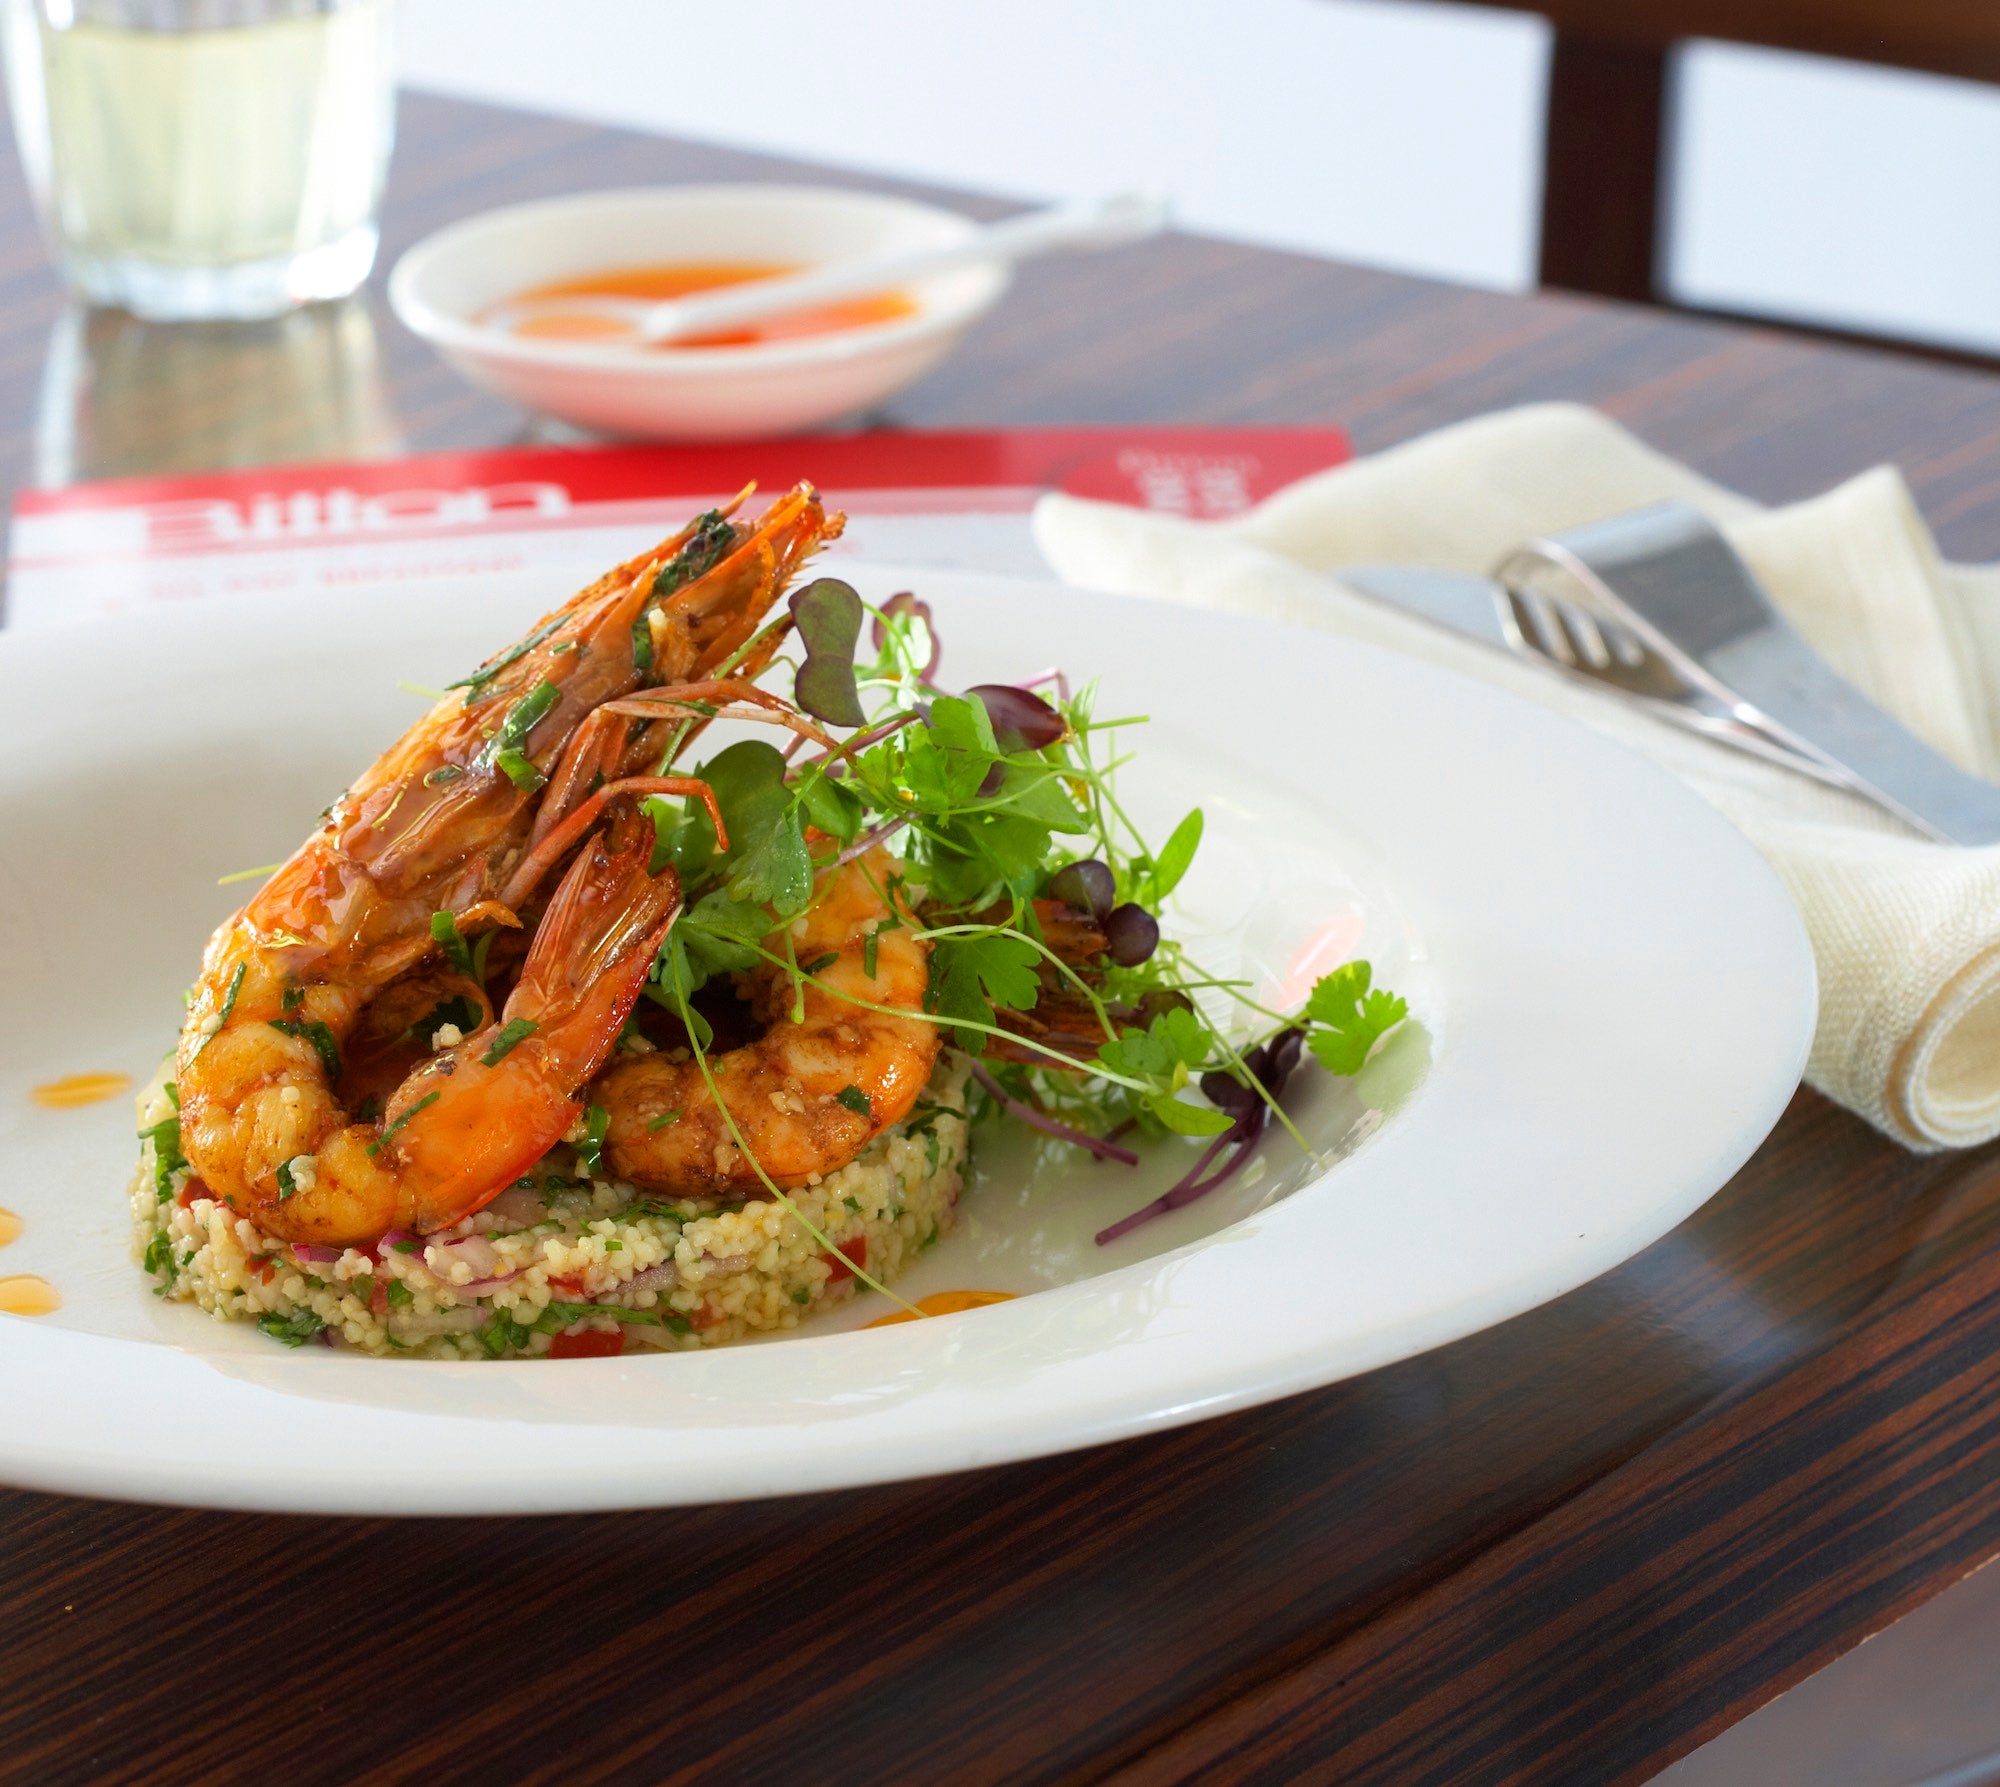 Chilli prawns on a bed of couscous